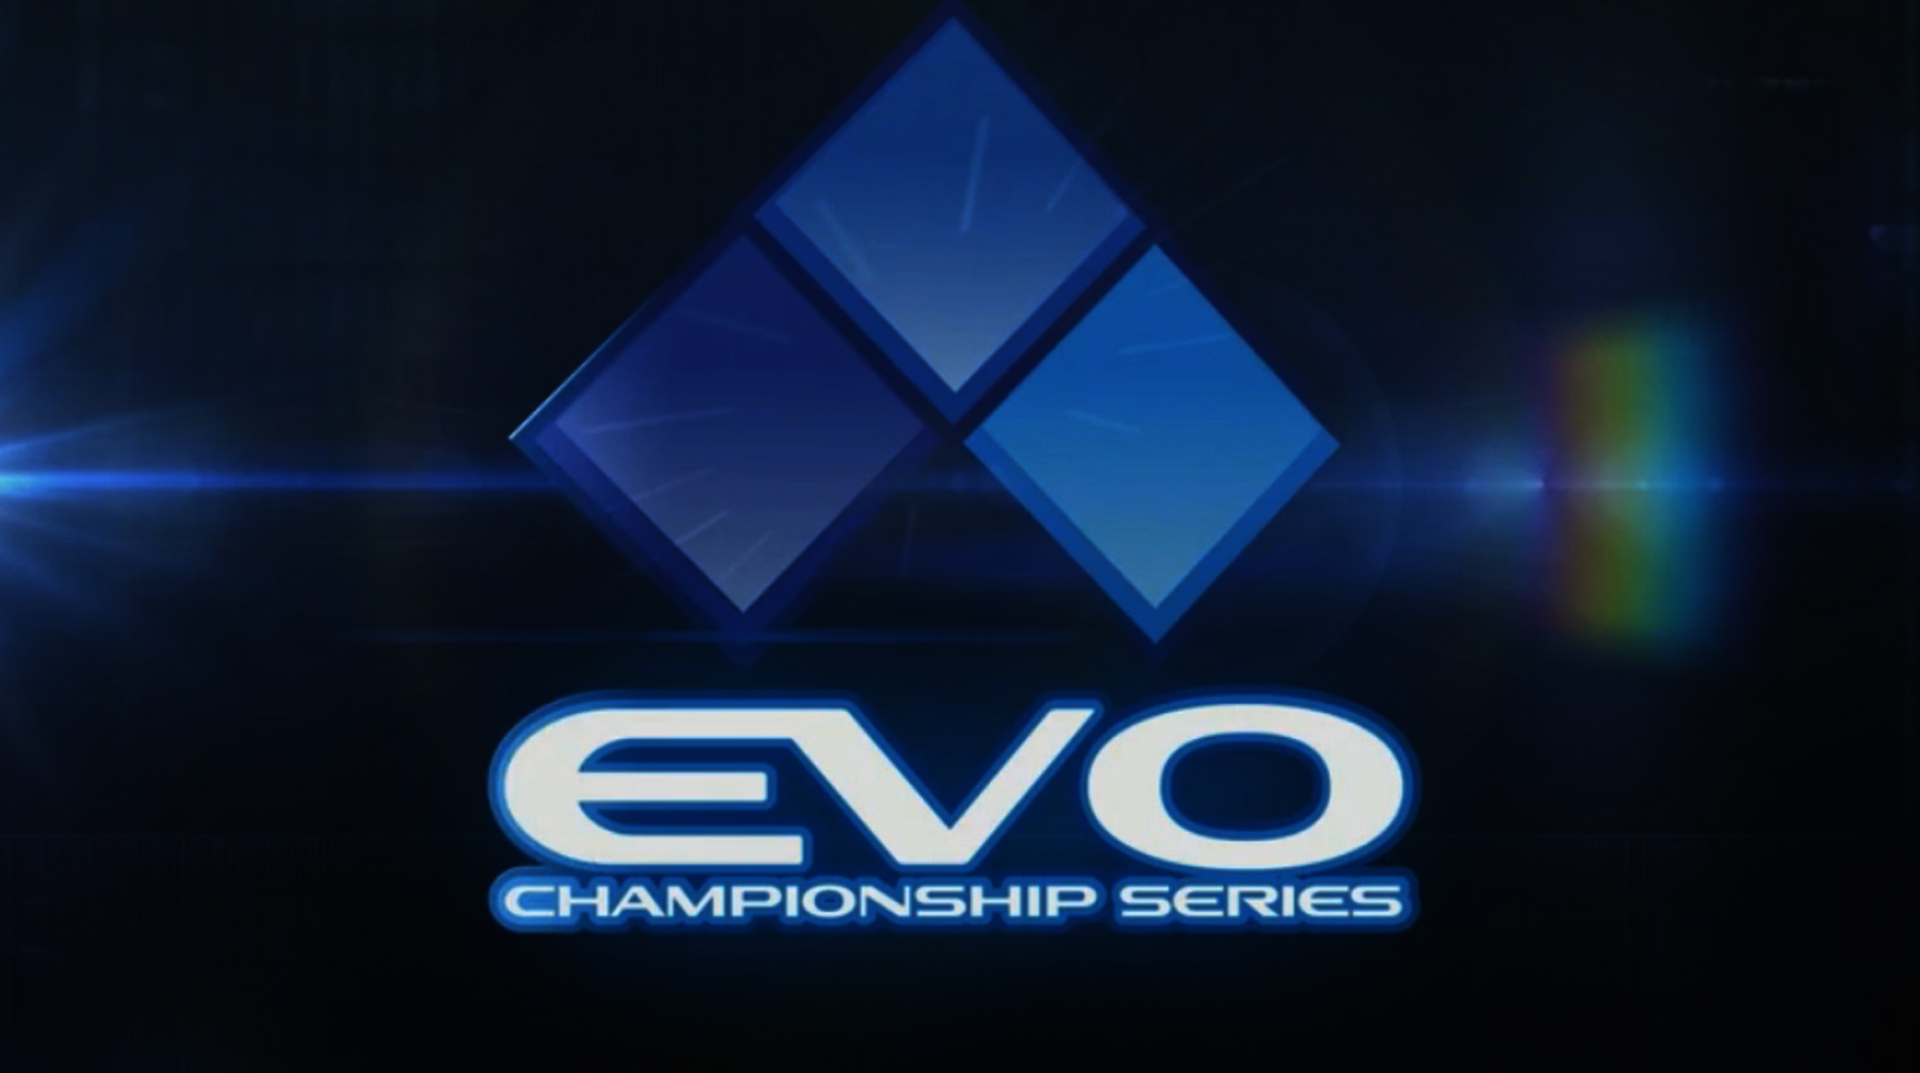 Guilty Gear Xrd and Persona 4 Arena Ultimate Joins Evo 2015 Lineup